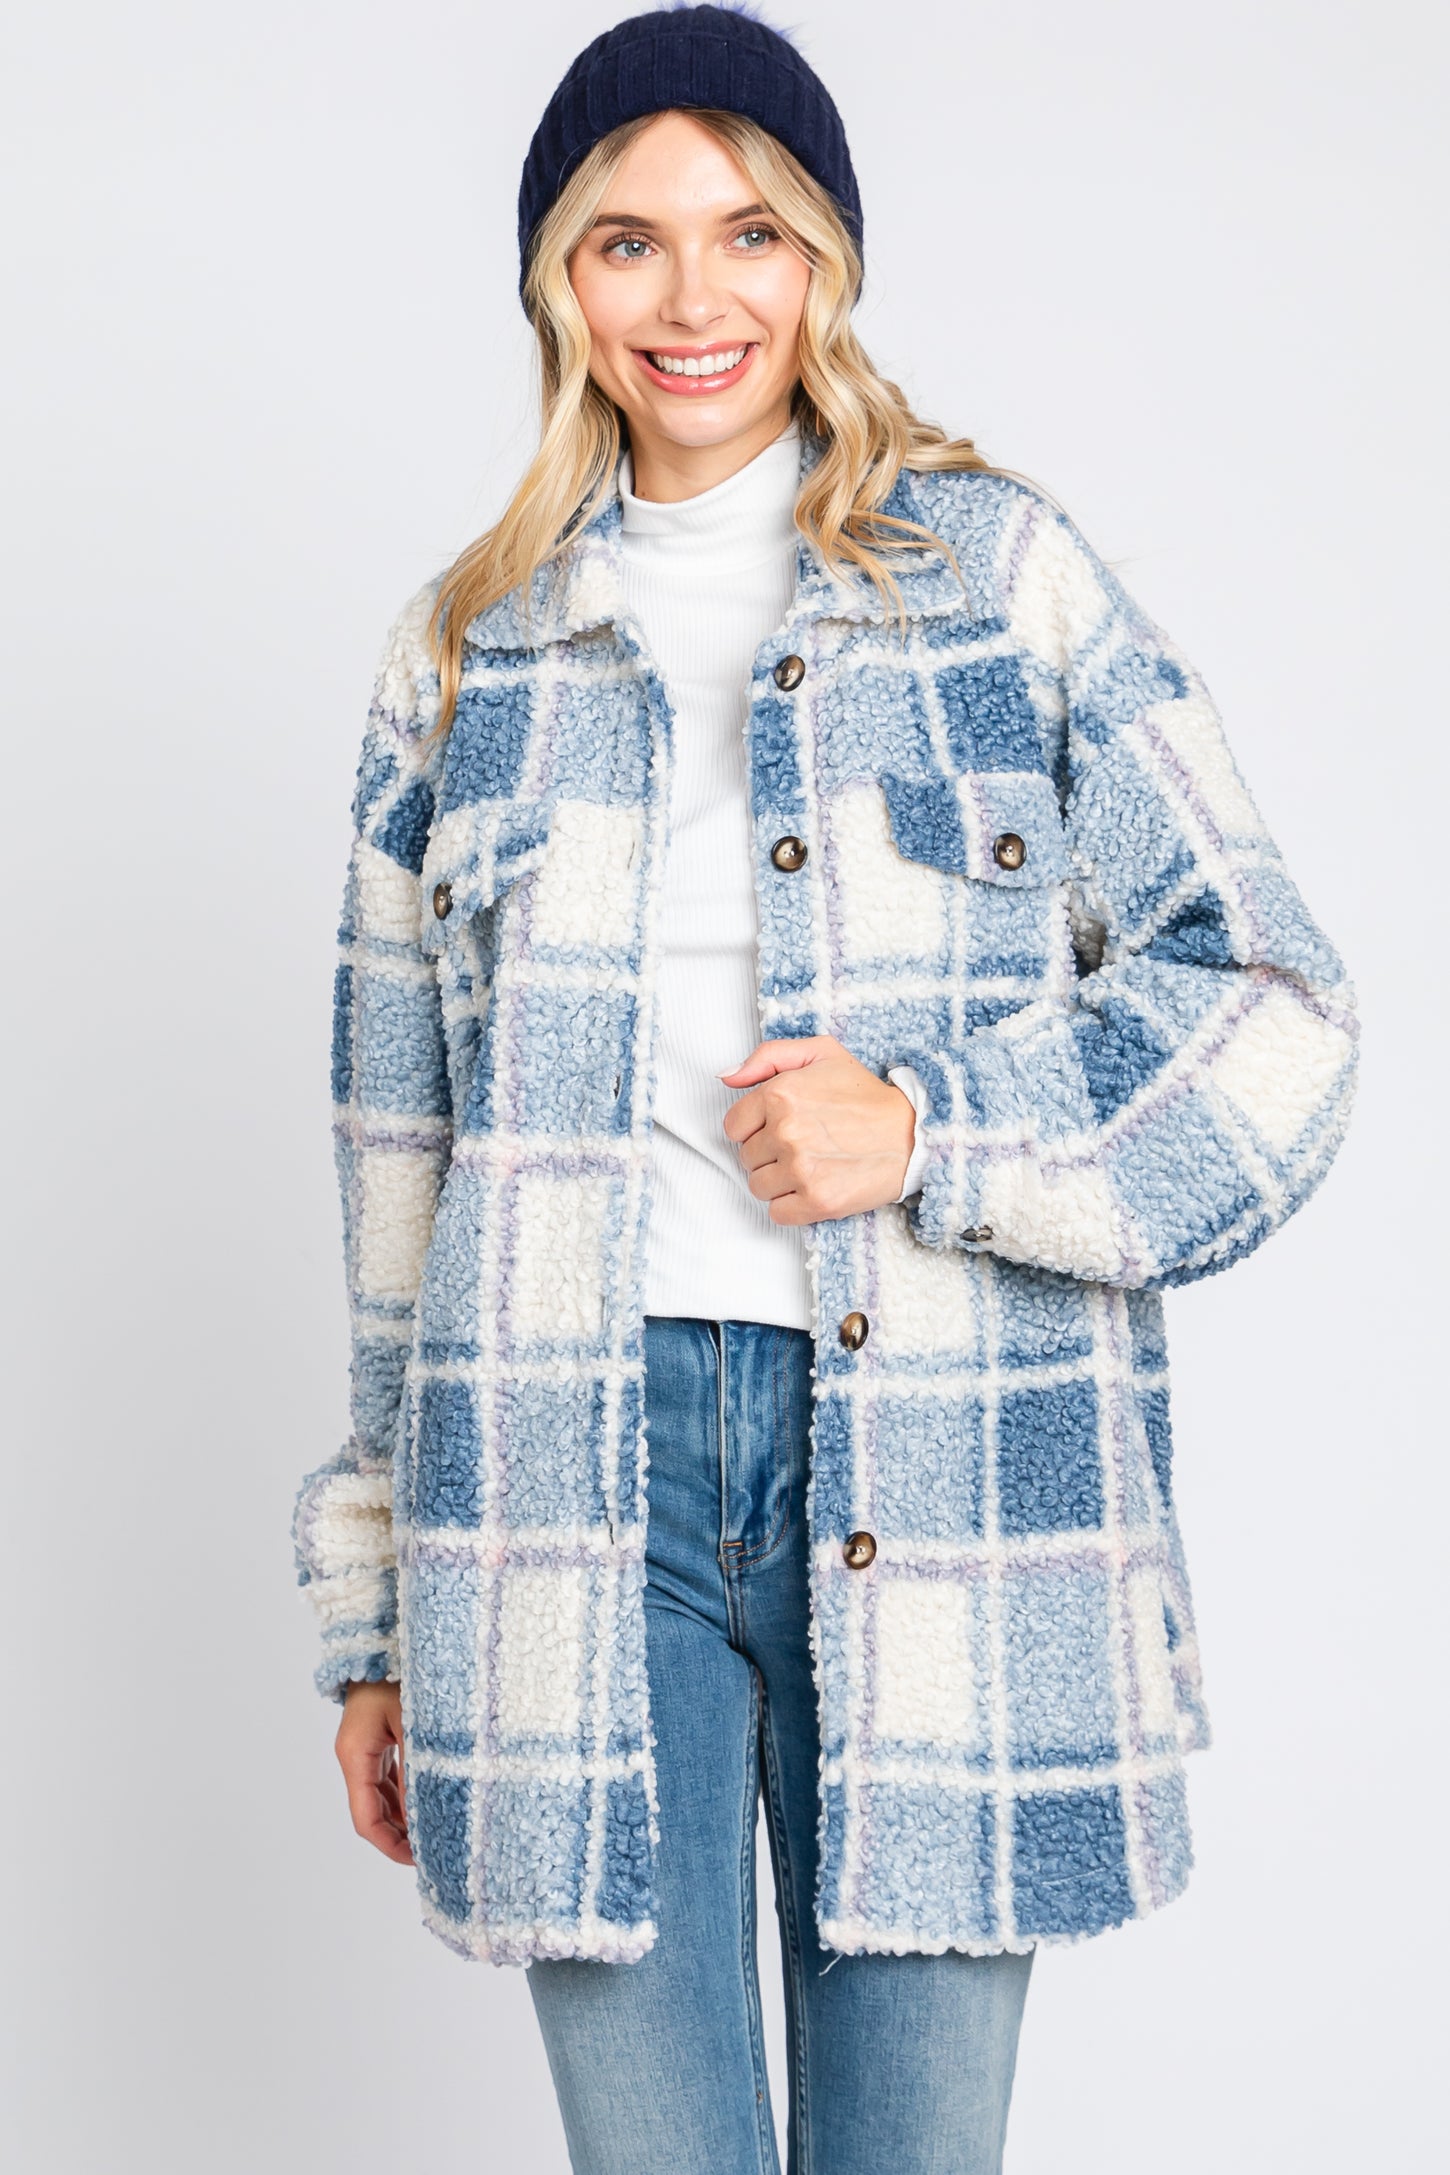 Buy Womens Sherpa Fleece Lined Flannel Shirt Jacket Warm Button Up Plaid  Shirt Jac (Sherpa Fleece Throughout) (Sky Blue, Small) at Amazon.in